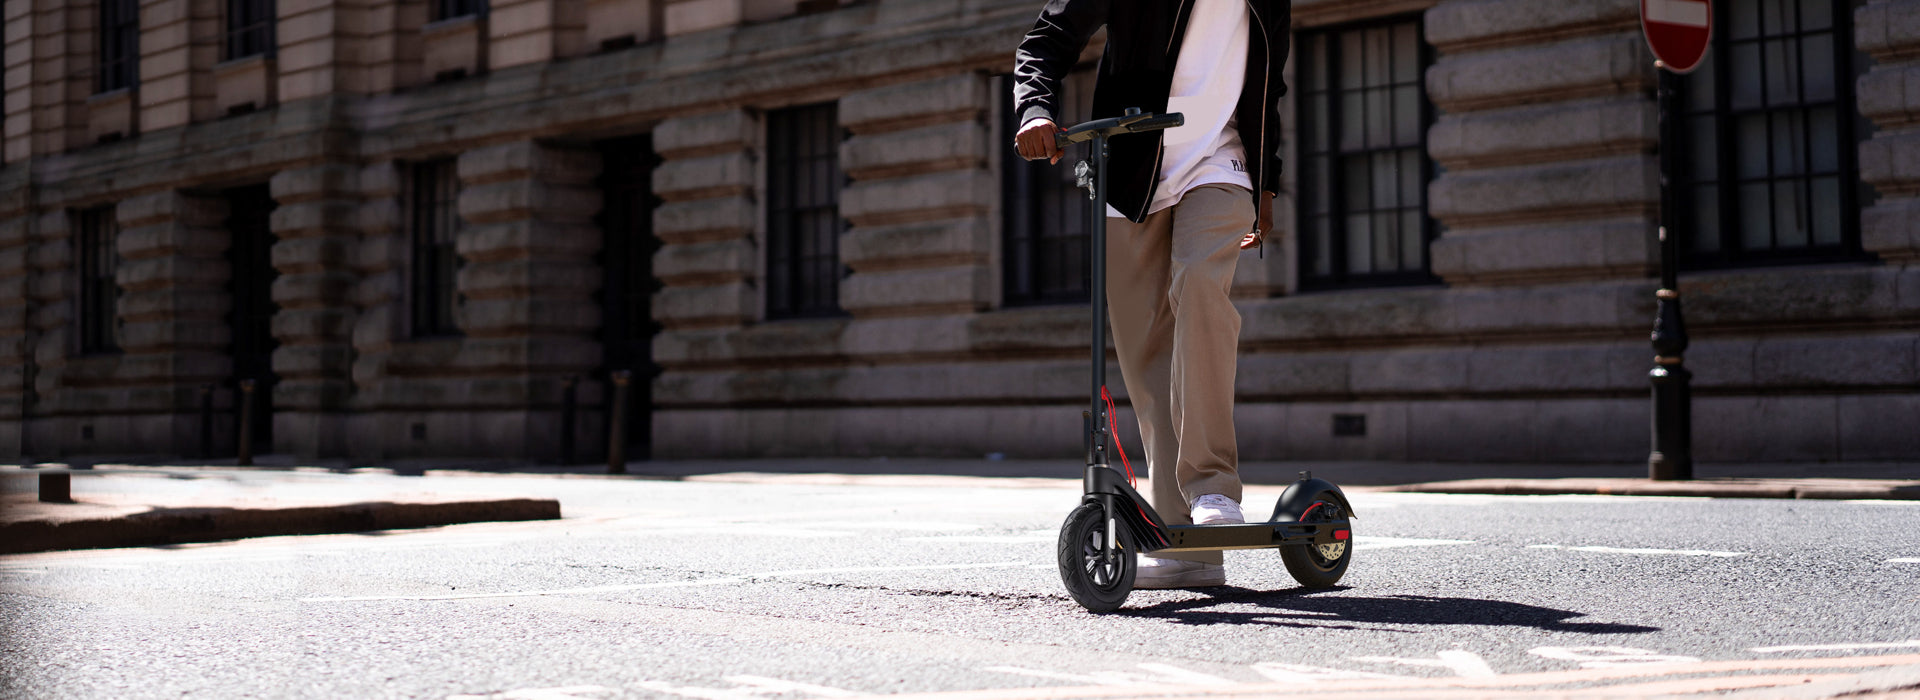 Turboant M10 Folding Electric Scooter for adult daily commute